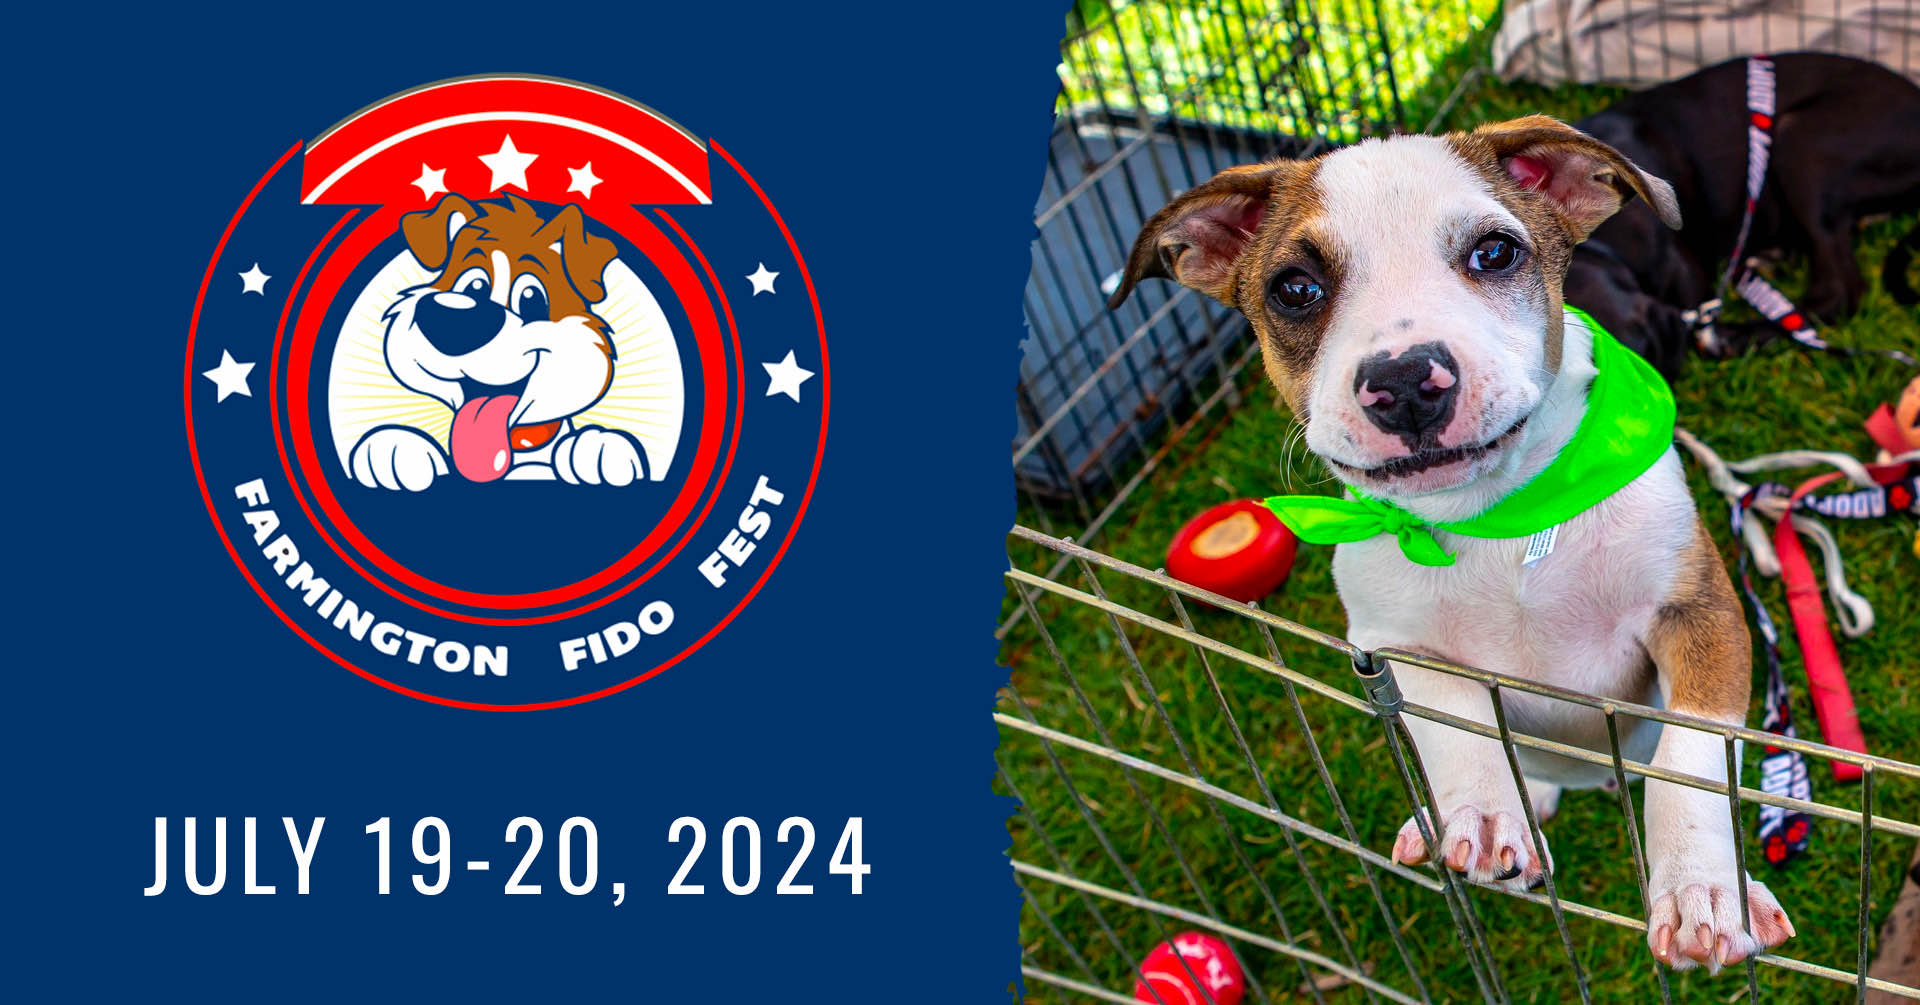 Farmington Fido Fest; July 19 - 20, 2024; image of adorable brown and white puppy with a neon green bandana